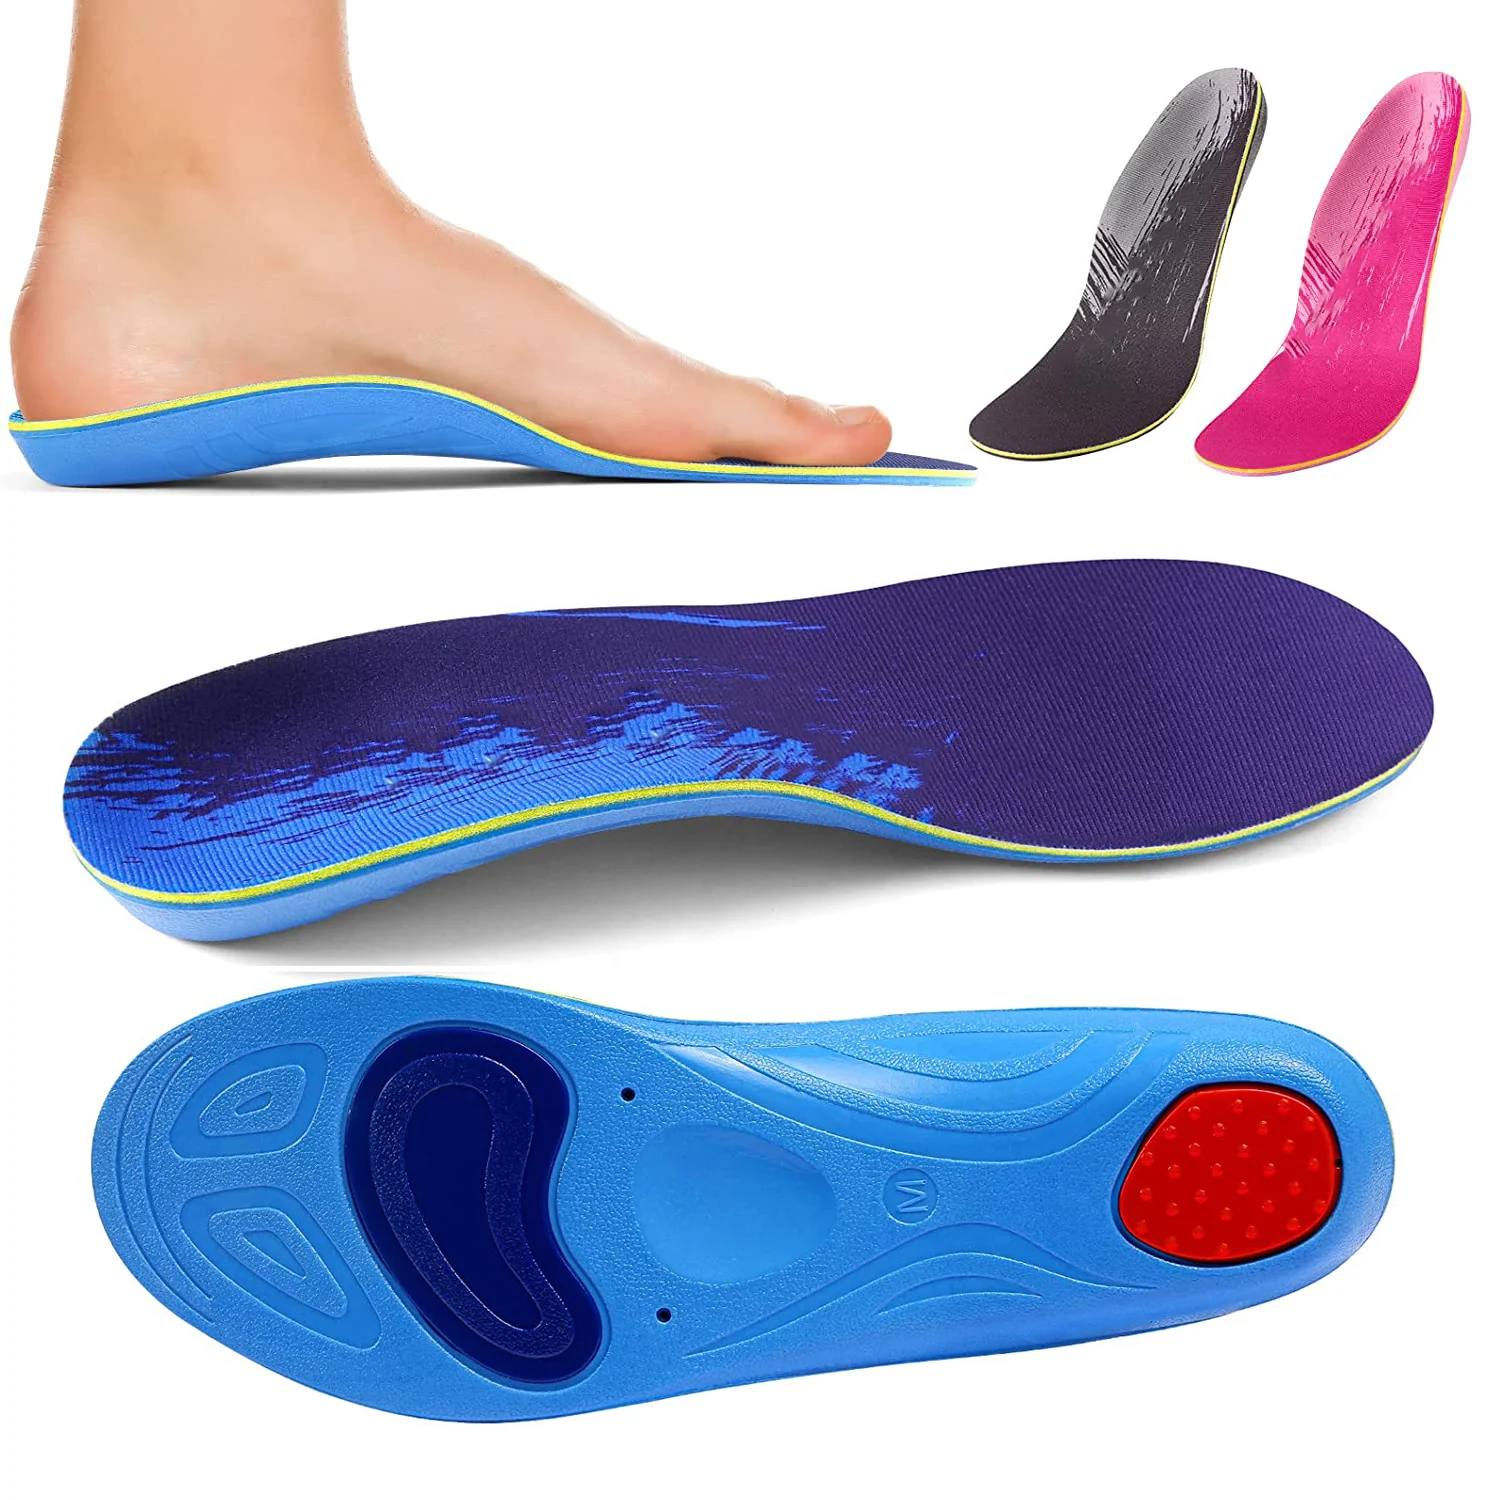 Arch Support Ortopedic Insoles For Plantar Fasciitis Foot Pain Relief ...